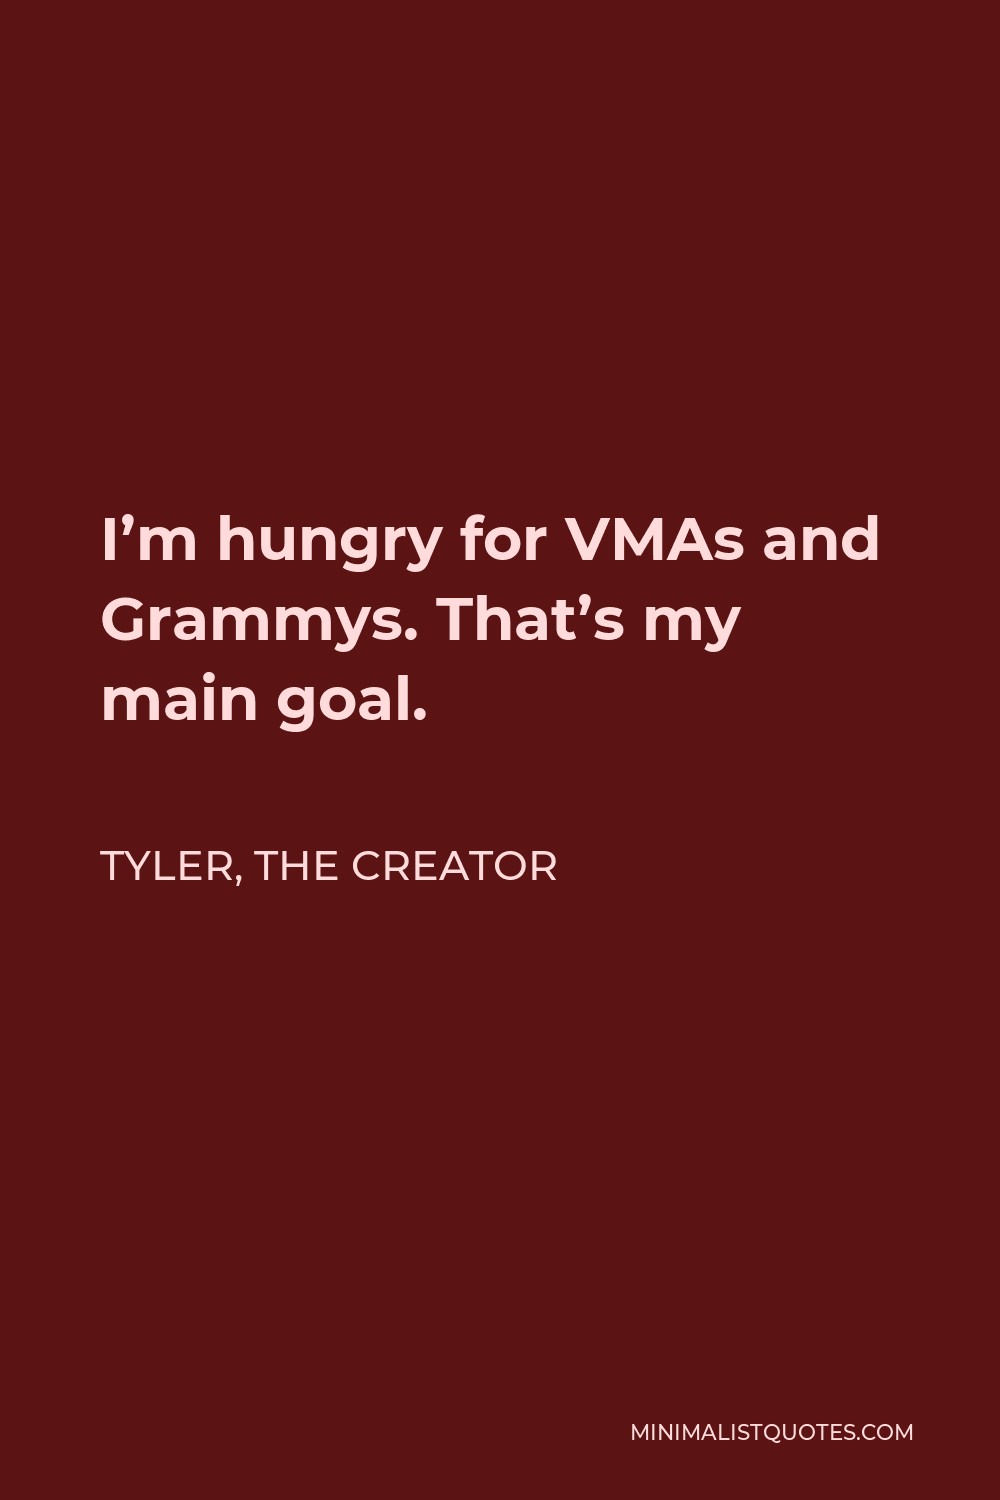 Tyler, the Creator Quote - I’m hungry for VMAs and Grammys. That’s my main goal.